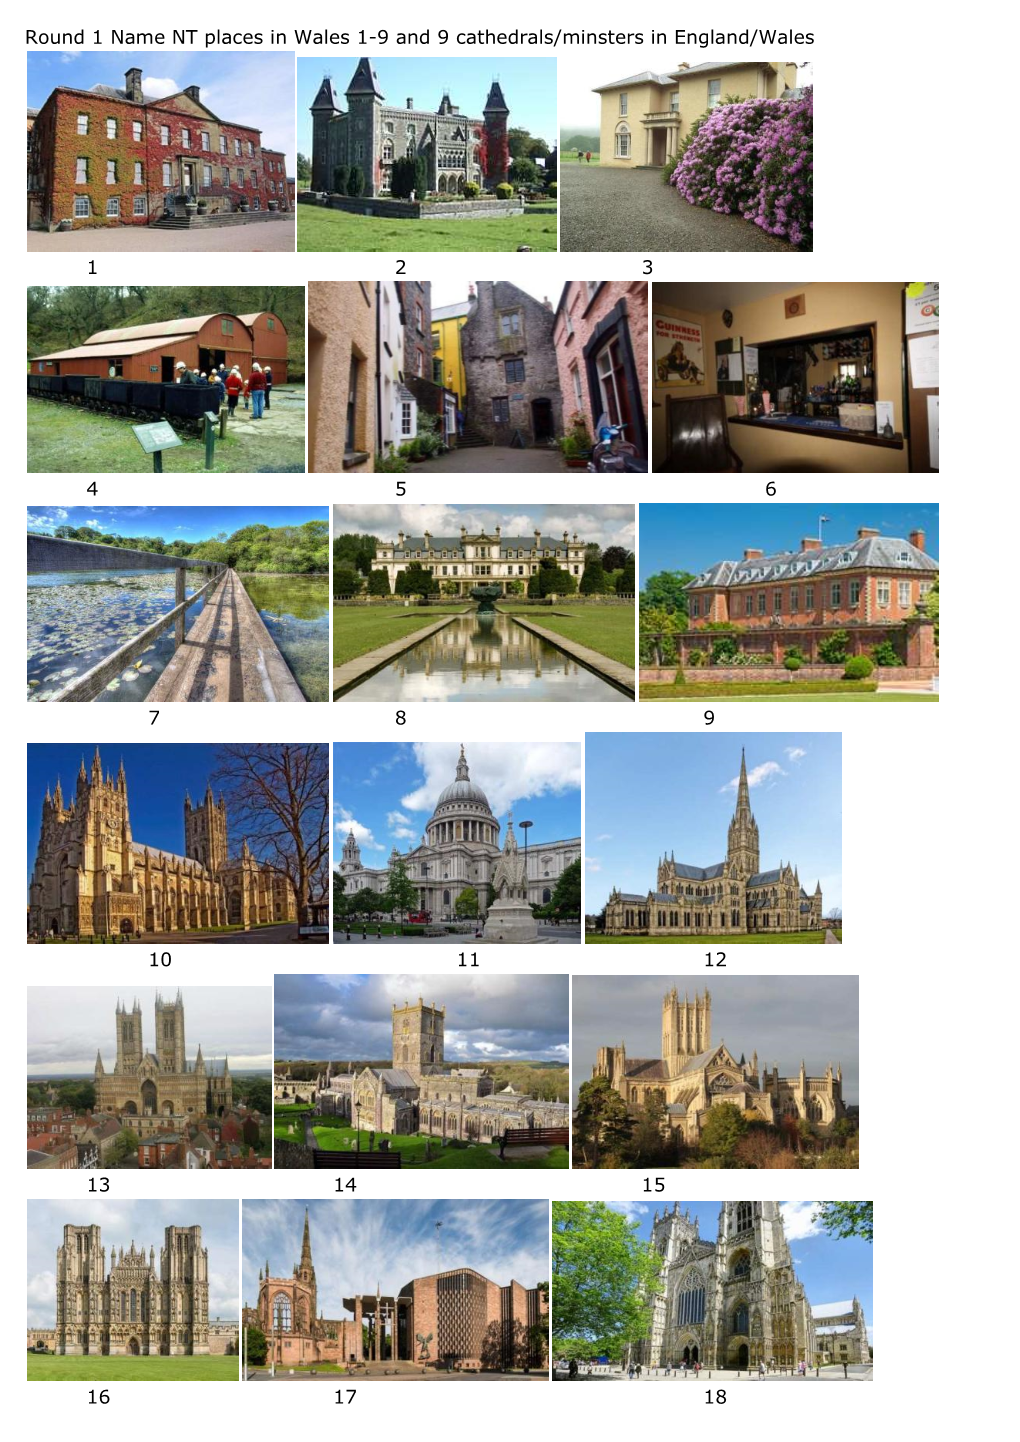 Round 1 Name NT Places in Wales 1-9 and 9 Cathedrals/Minsters in England/Wales